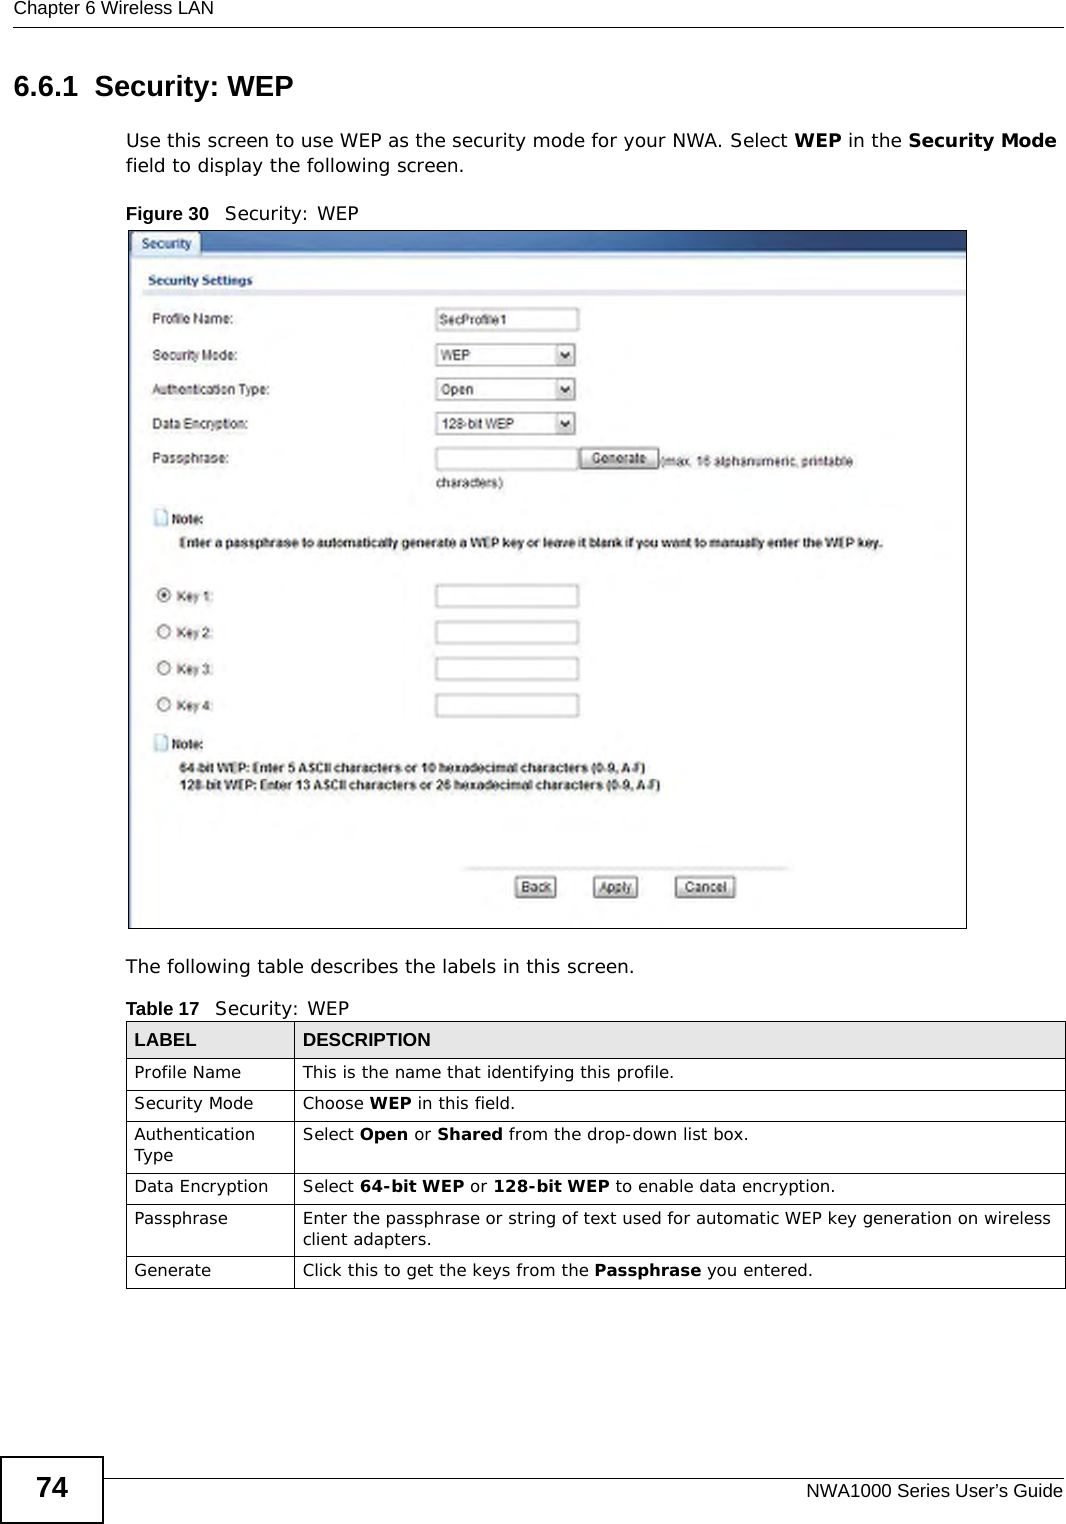 Chapter 6 Wireless LANNWA1000 Series User’s Guide746.6.1  Security: WEPUse this screen to use WEP as the security mode for your NWA. Select WEP in the Security Mode field to display the following screen.Figure 30   Security: WEPThe following table describes the labels in this screen.Table 17   Security: WEPLABEL DESCRIPTIONProfile Name This is the name that identifying this profile.Security Mode Choose WEP in this field.Authentication Type Select Open or Shared from the drop-down list box. Data Encryption Select 64-bit WEP or 128-bit WEP to enable data encryption. Passphrase Enter the passphrase or string of text used for automatic WEP key generation on wireless client adapters. Generate Click this to get the keys from the Passphrase you entered.